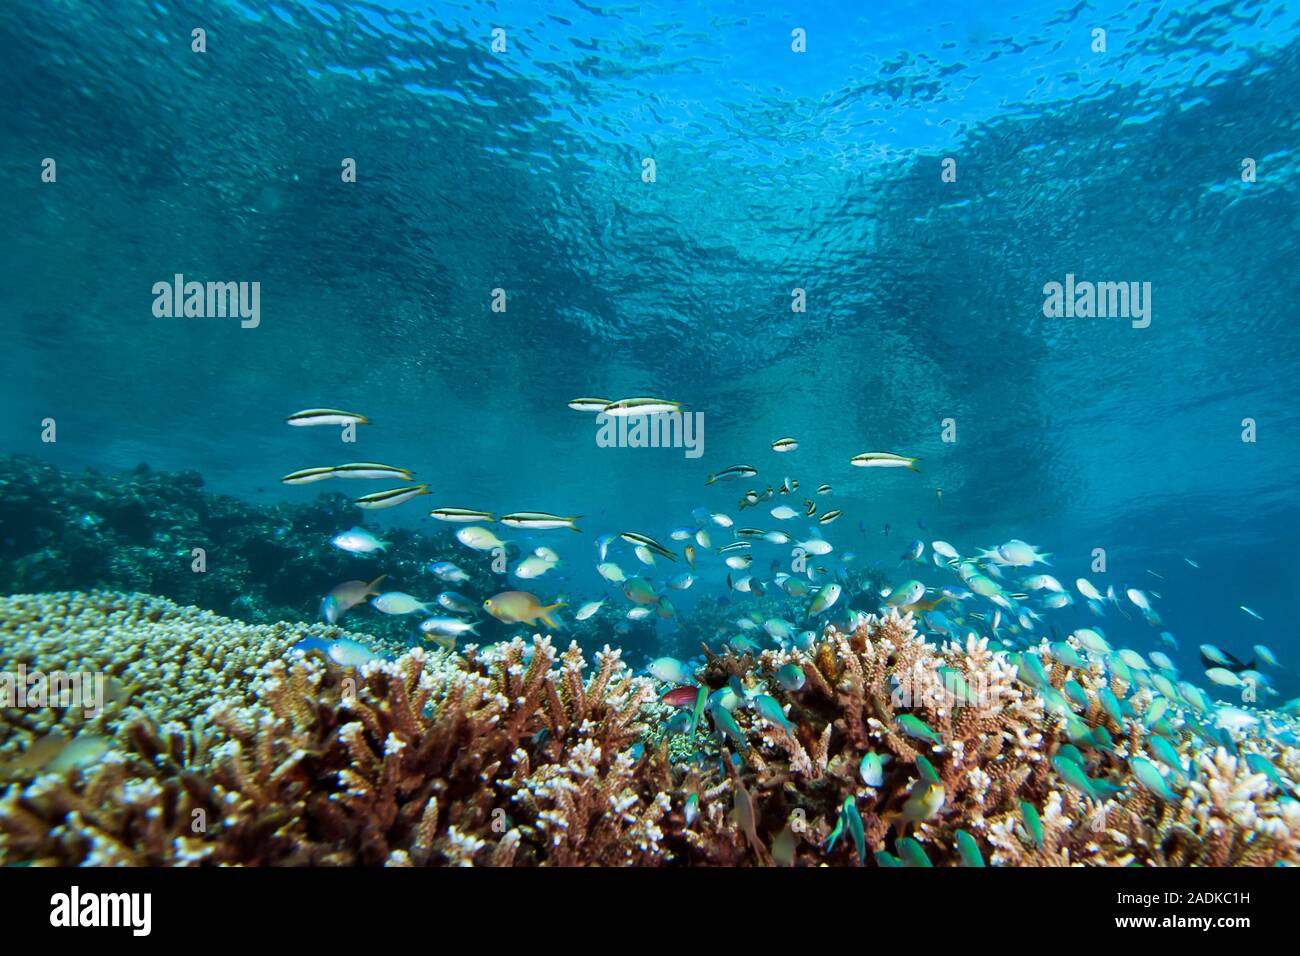 Tropical Coral Reef Underwater Landscape Stock Photo